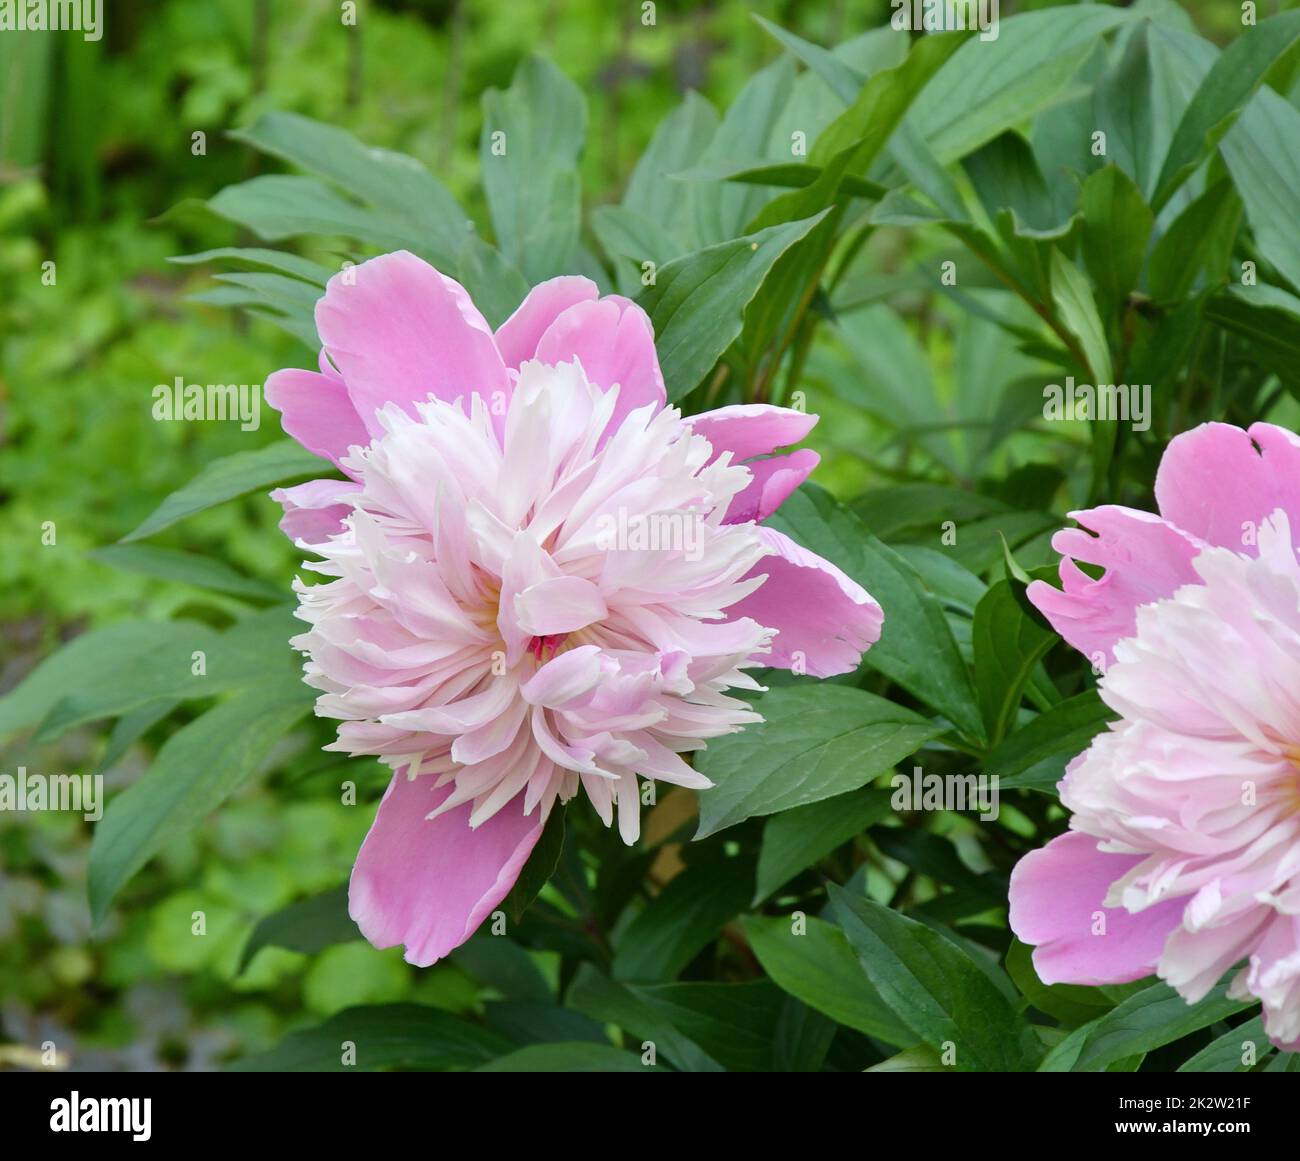 Peony flower (lat. Paeonia) white-pink color Stock Photo